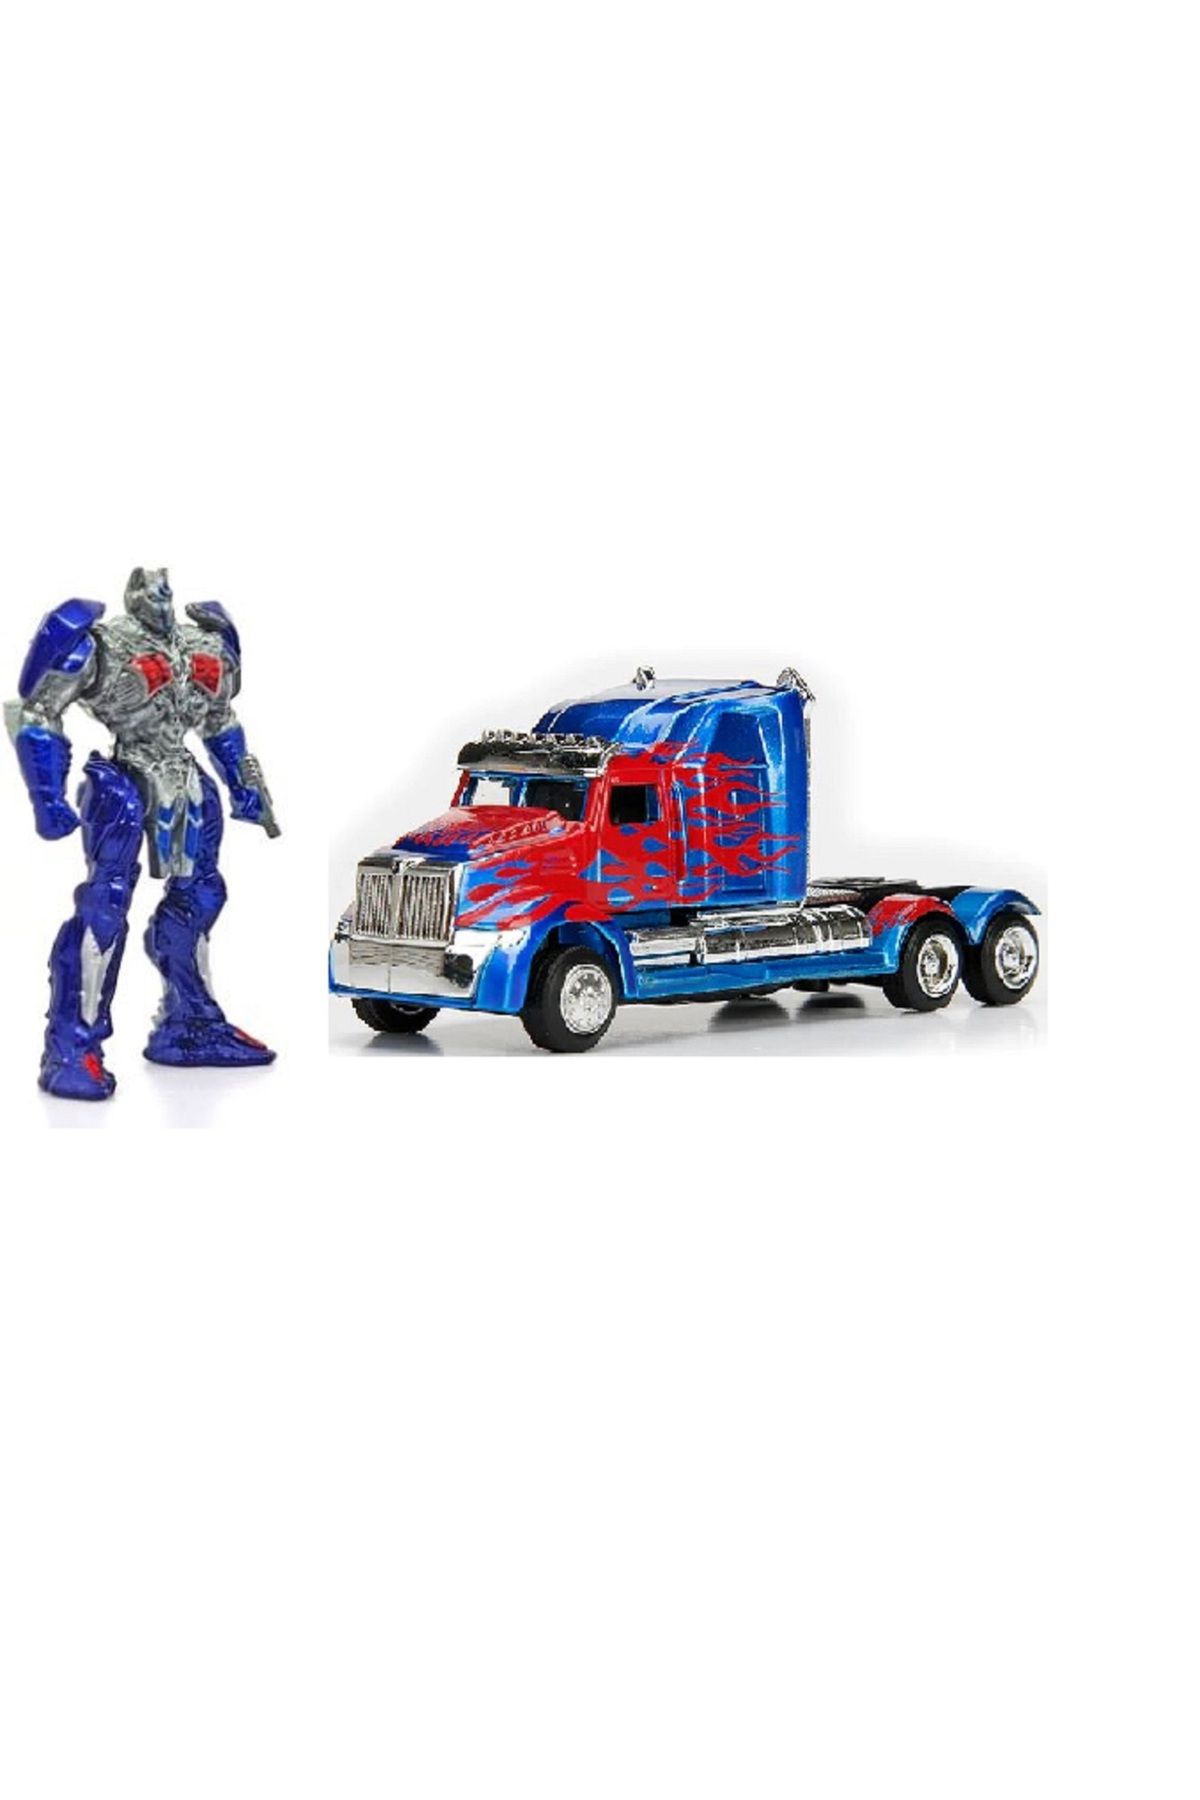 transformers Optimus Prime The Legendary Packs-Collector Edition